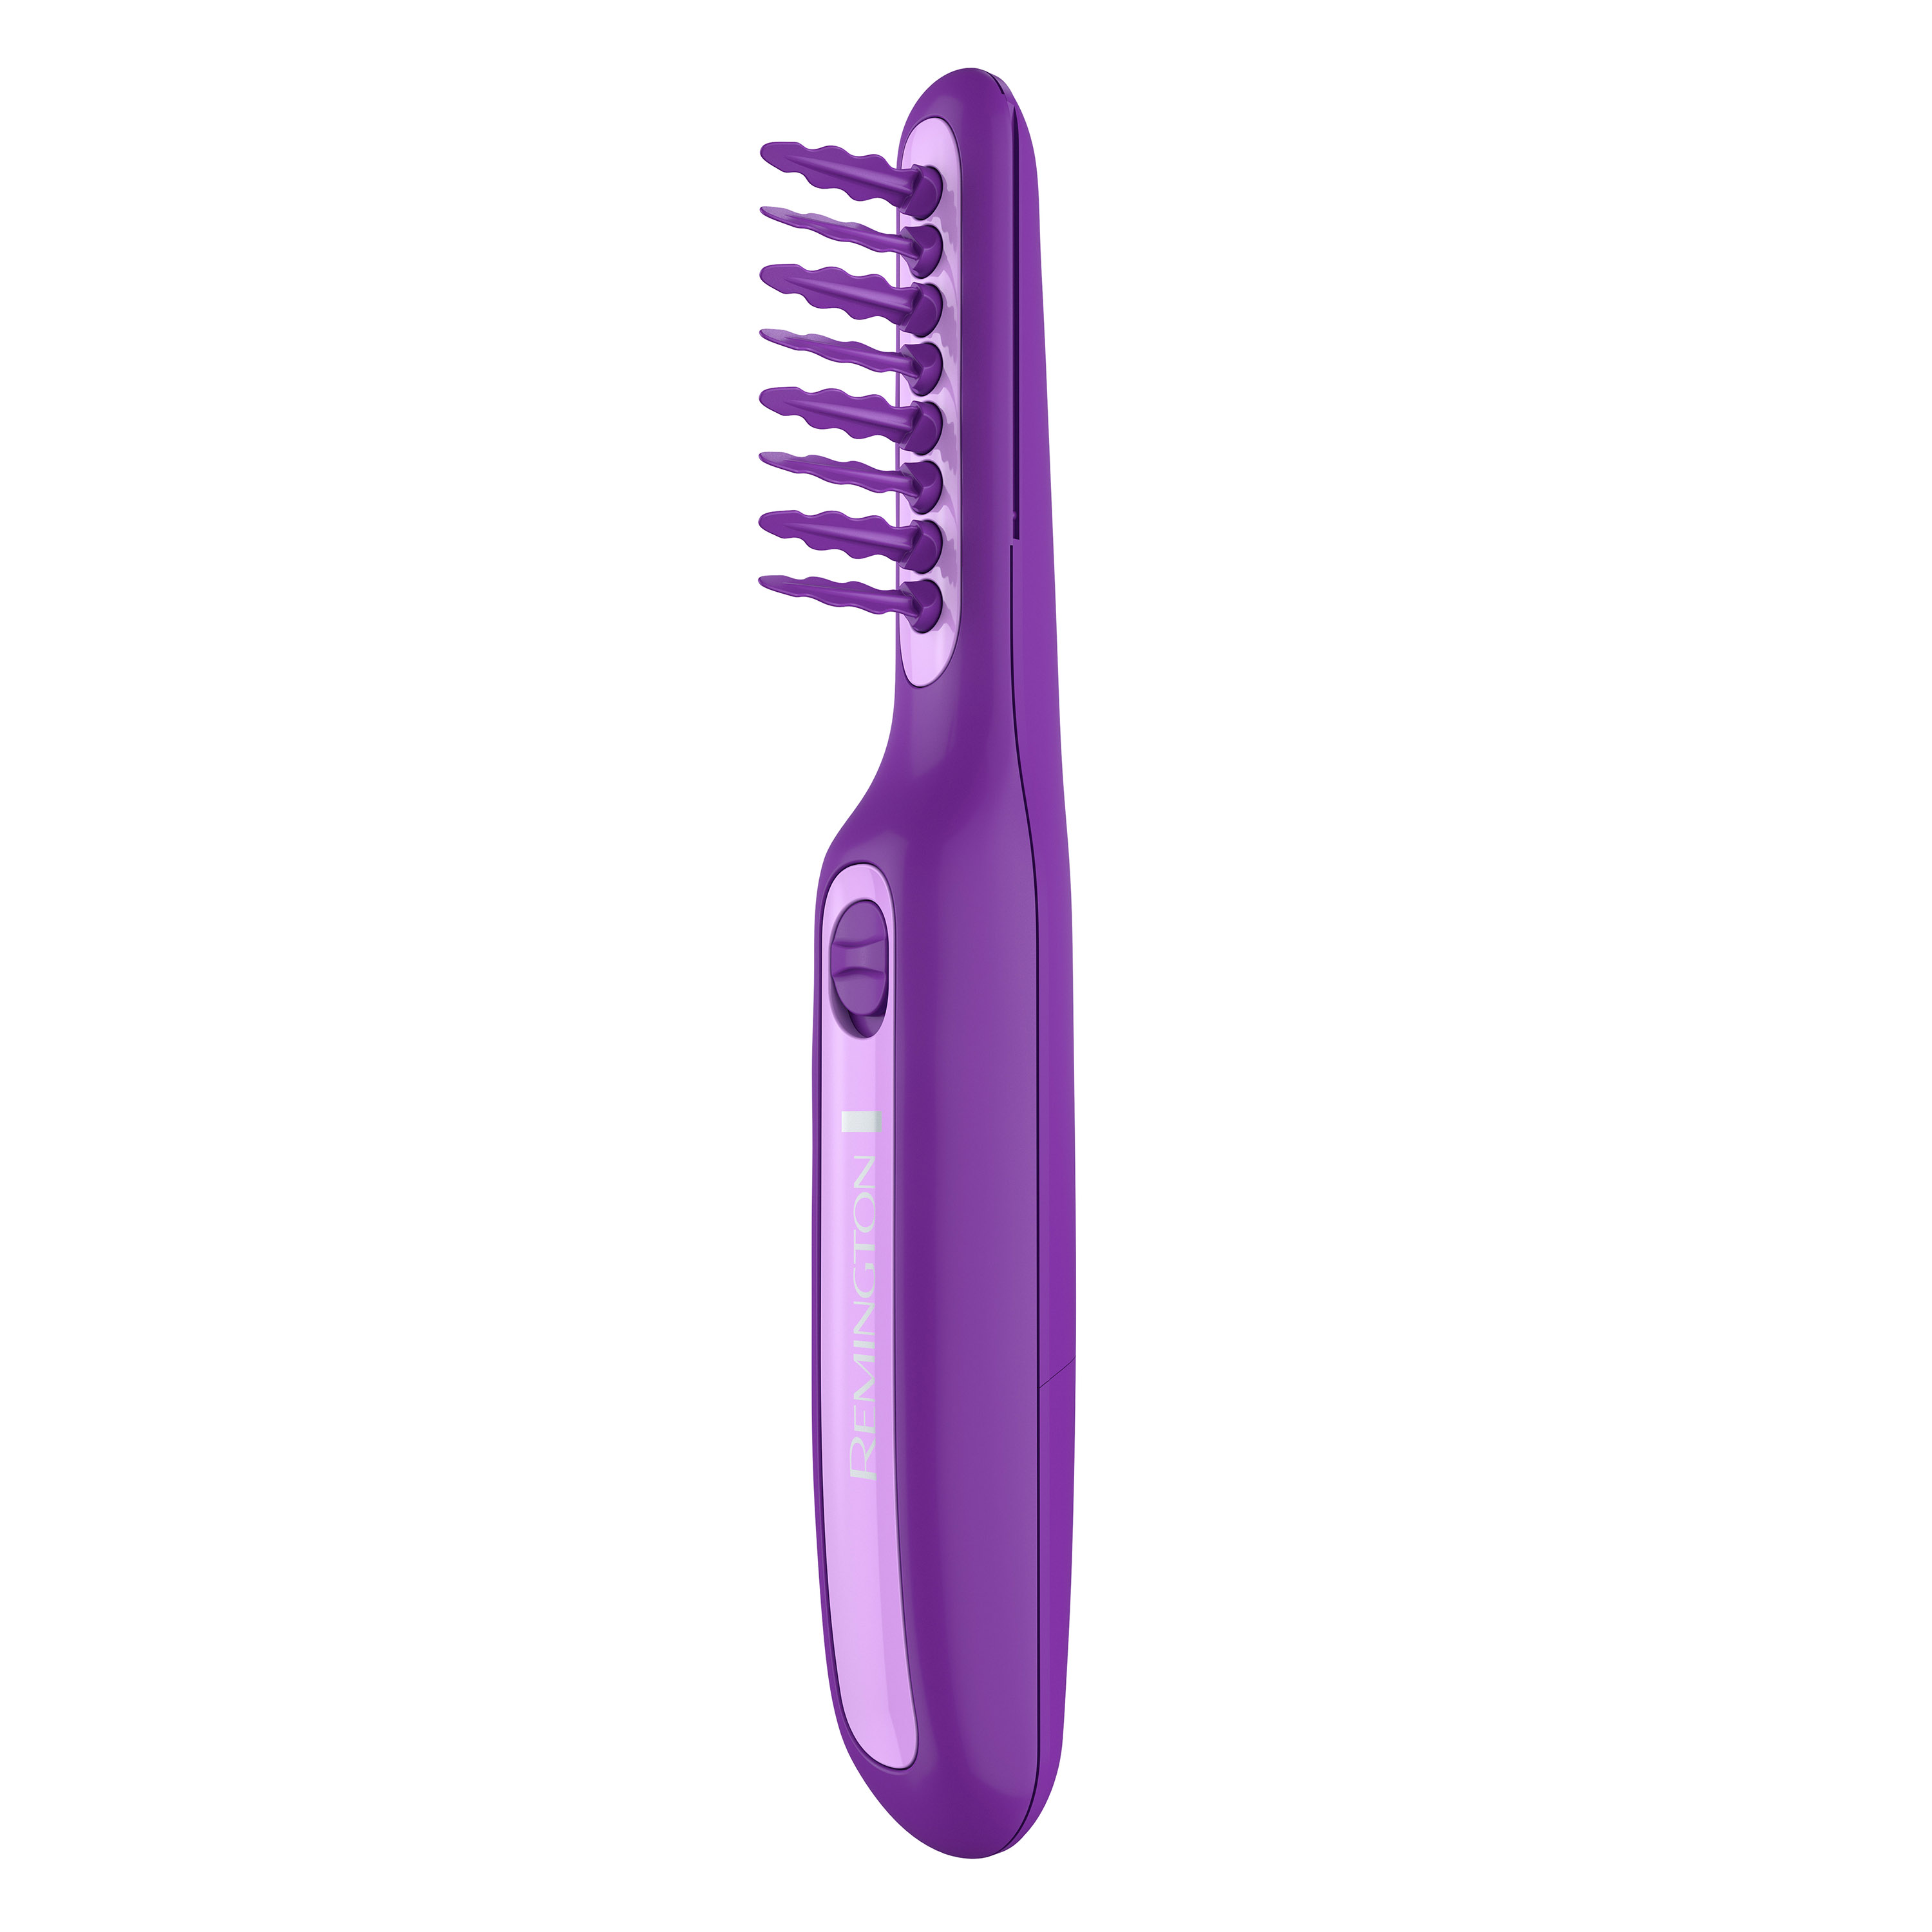 Remington DT7432 Wet or Dry Tame The Mane Electric Detangling Brush with Brush Cover, Adults & Kids, (Batteries Included), Purple, 1 Count